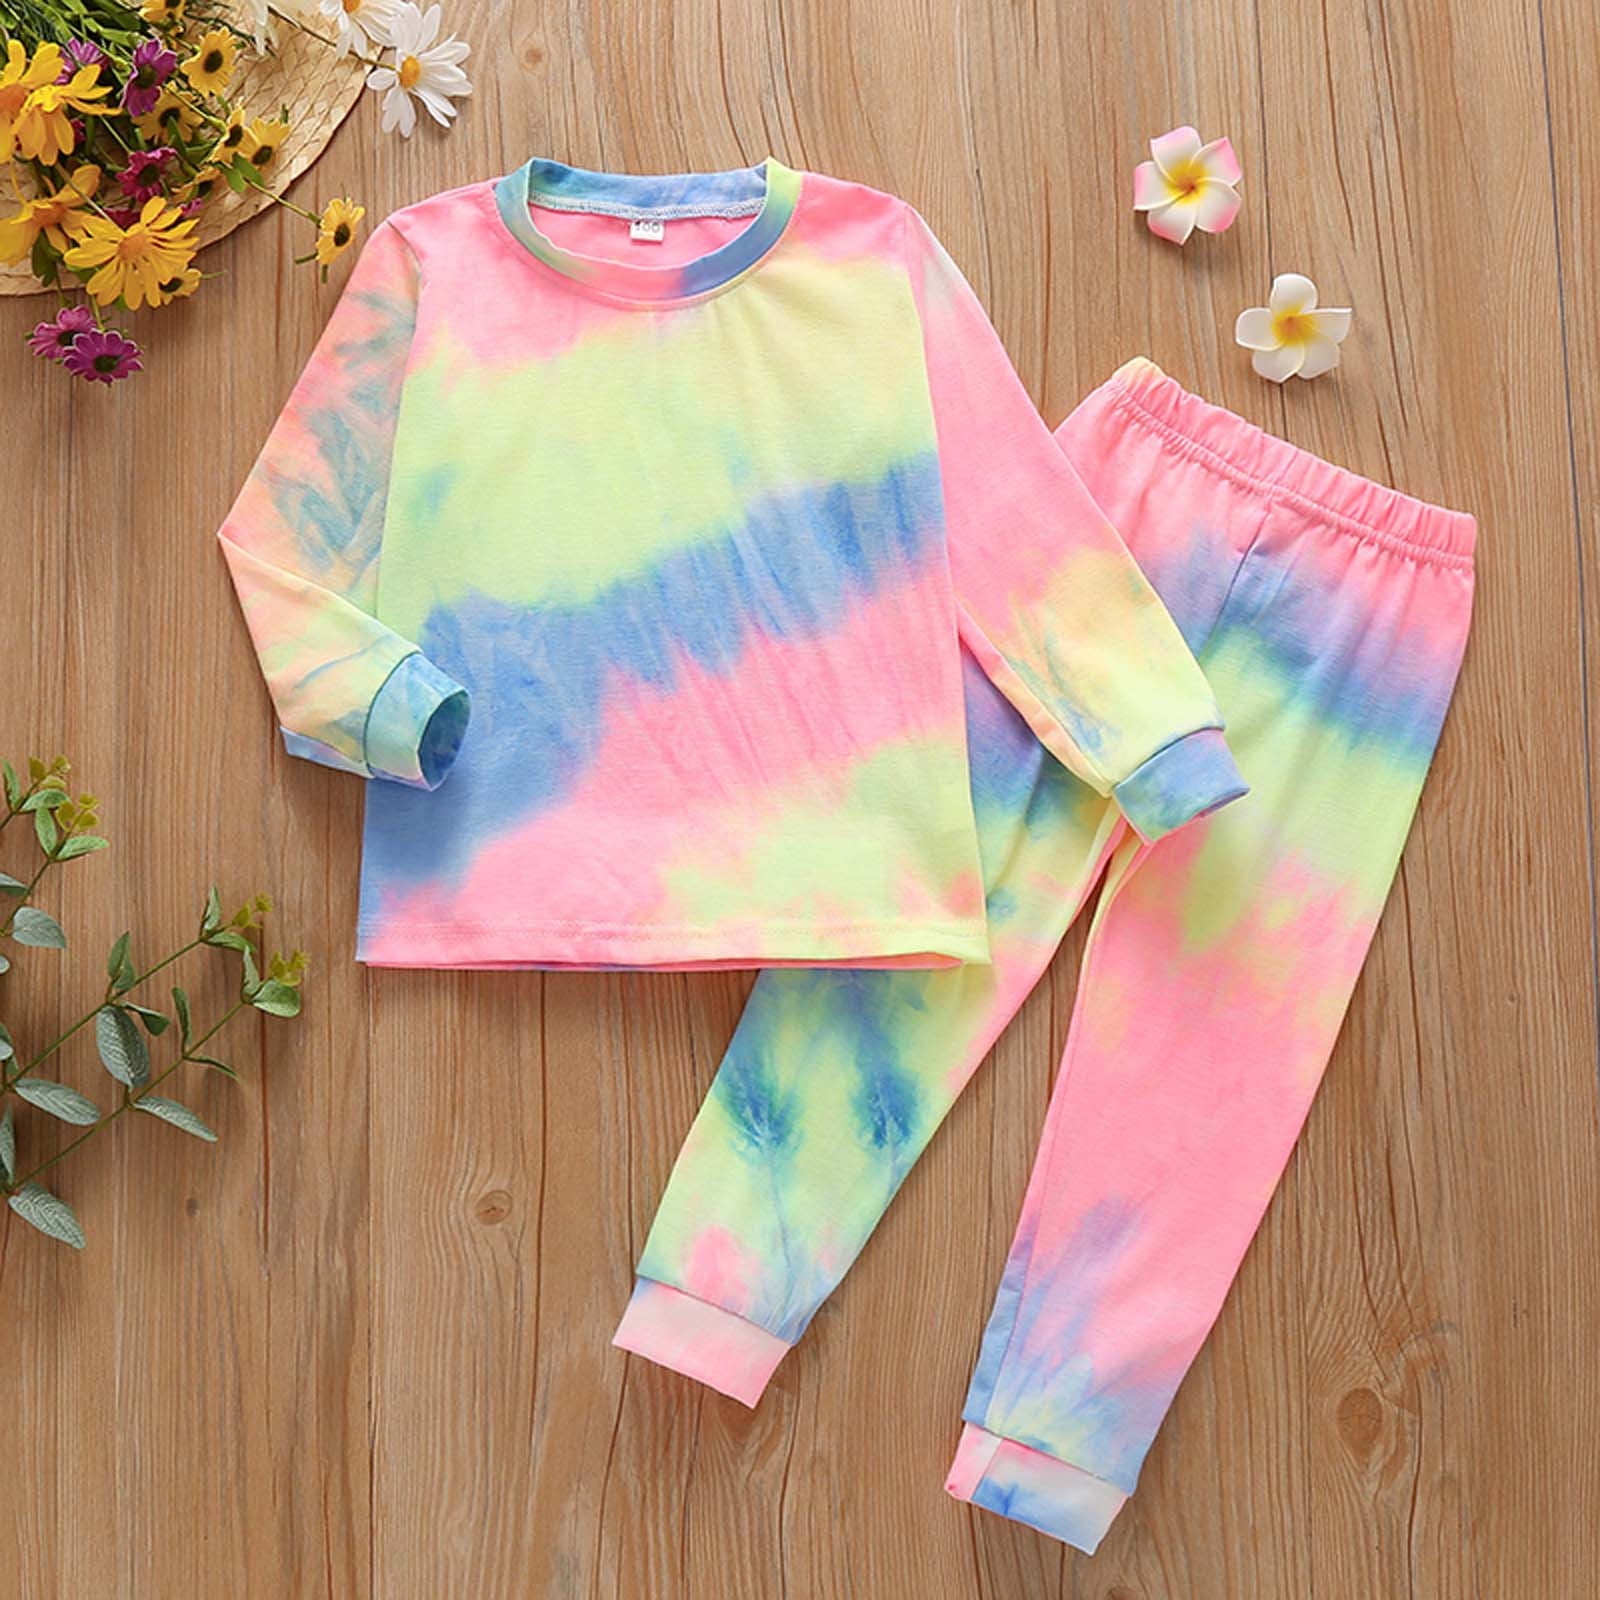 Herrnalise Toddler Baby Girls Rainbow Tie-dye Long-sleeved Top Trousers  Clothes Suit 